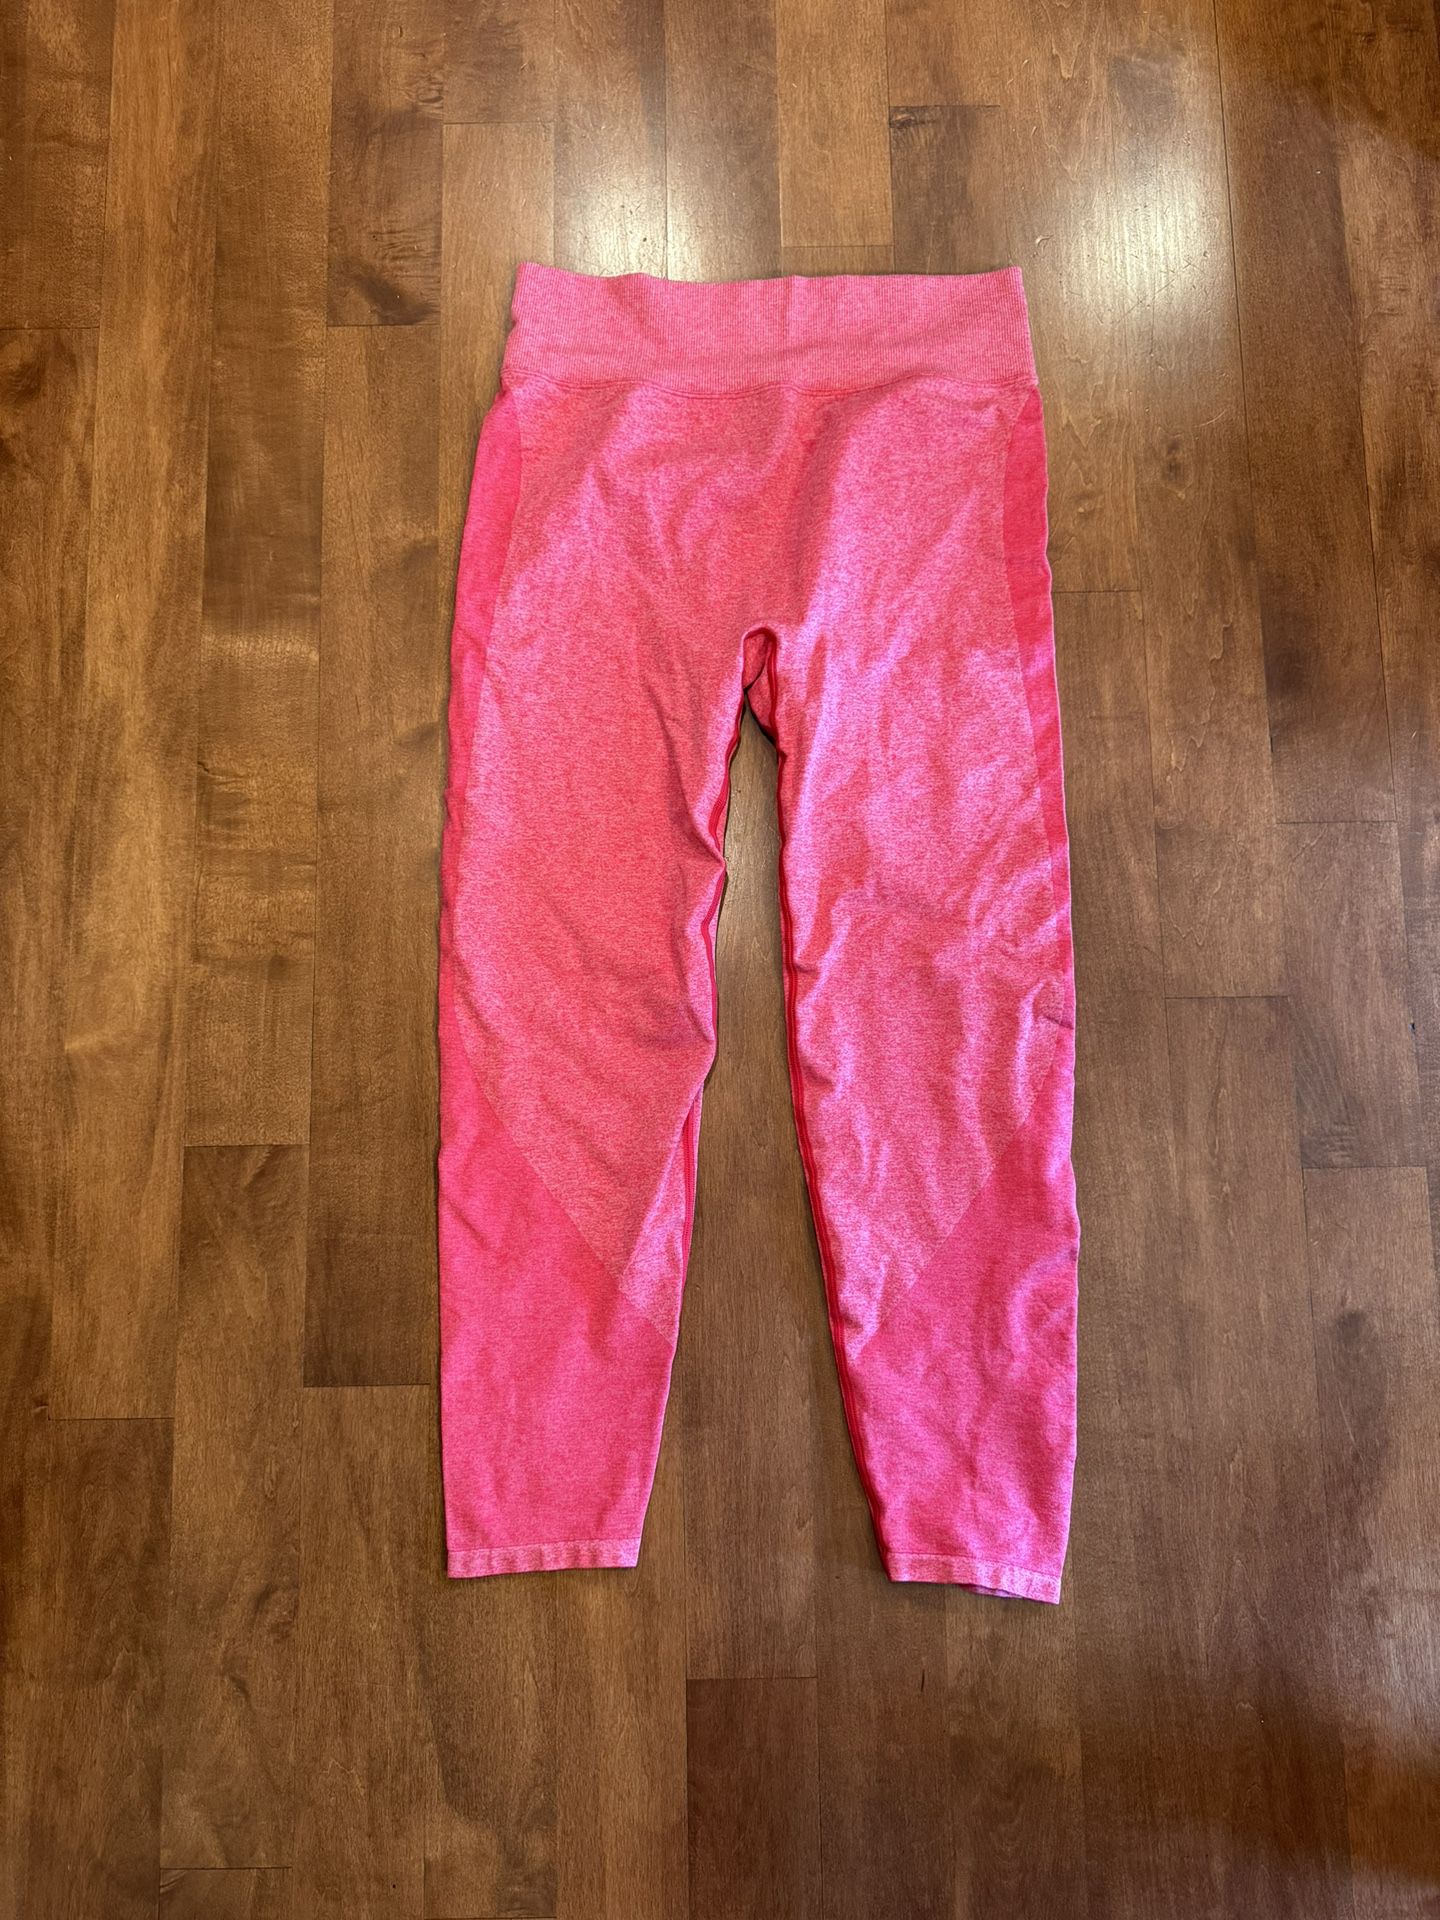 Women’s Victoria’s Secret Pink Workout Leggings Shipping Available